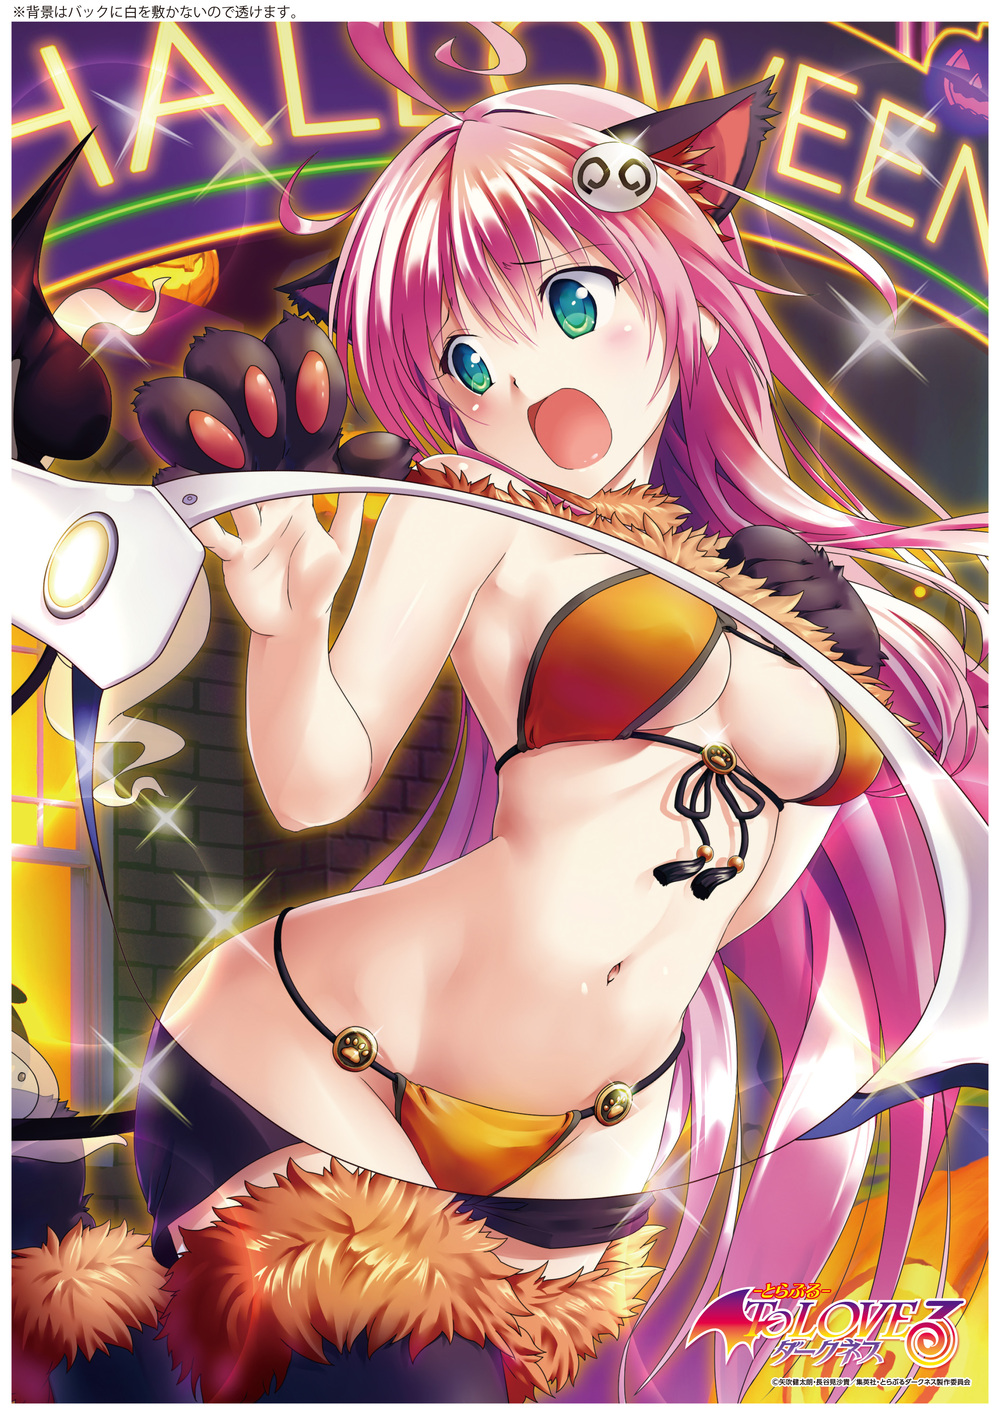 To Love Ru Darkness A3 Clear Poster Lala Blindfold Halloween Ver To Loveる とらぶる ダークネス A3クリアポスター ララ 目隠しハロウィンver Anime Goods Illustrations